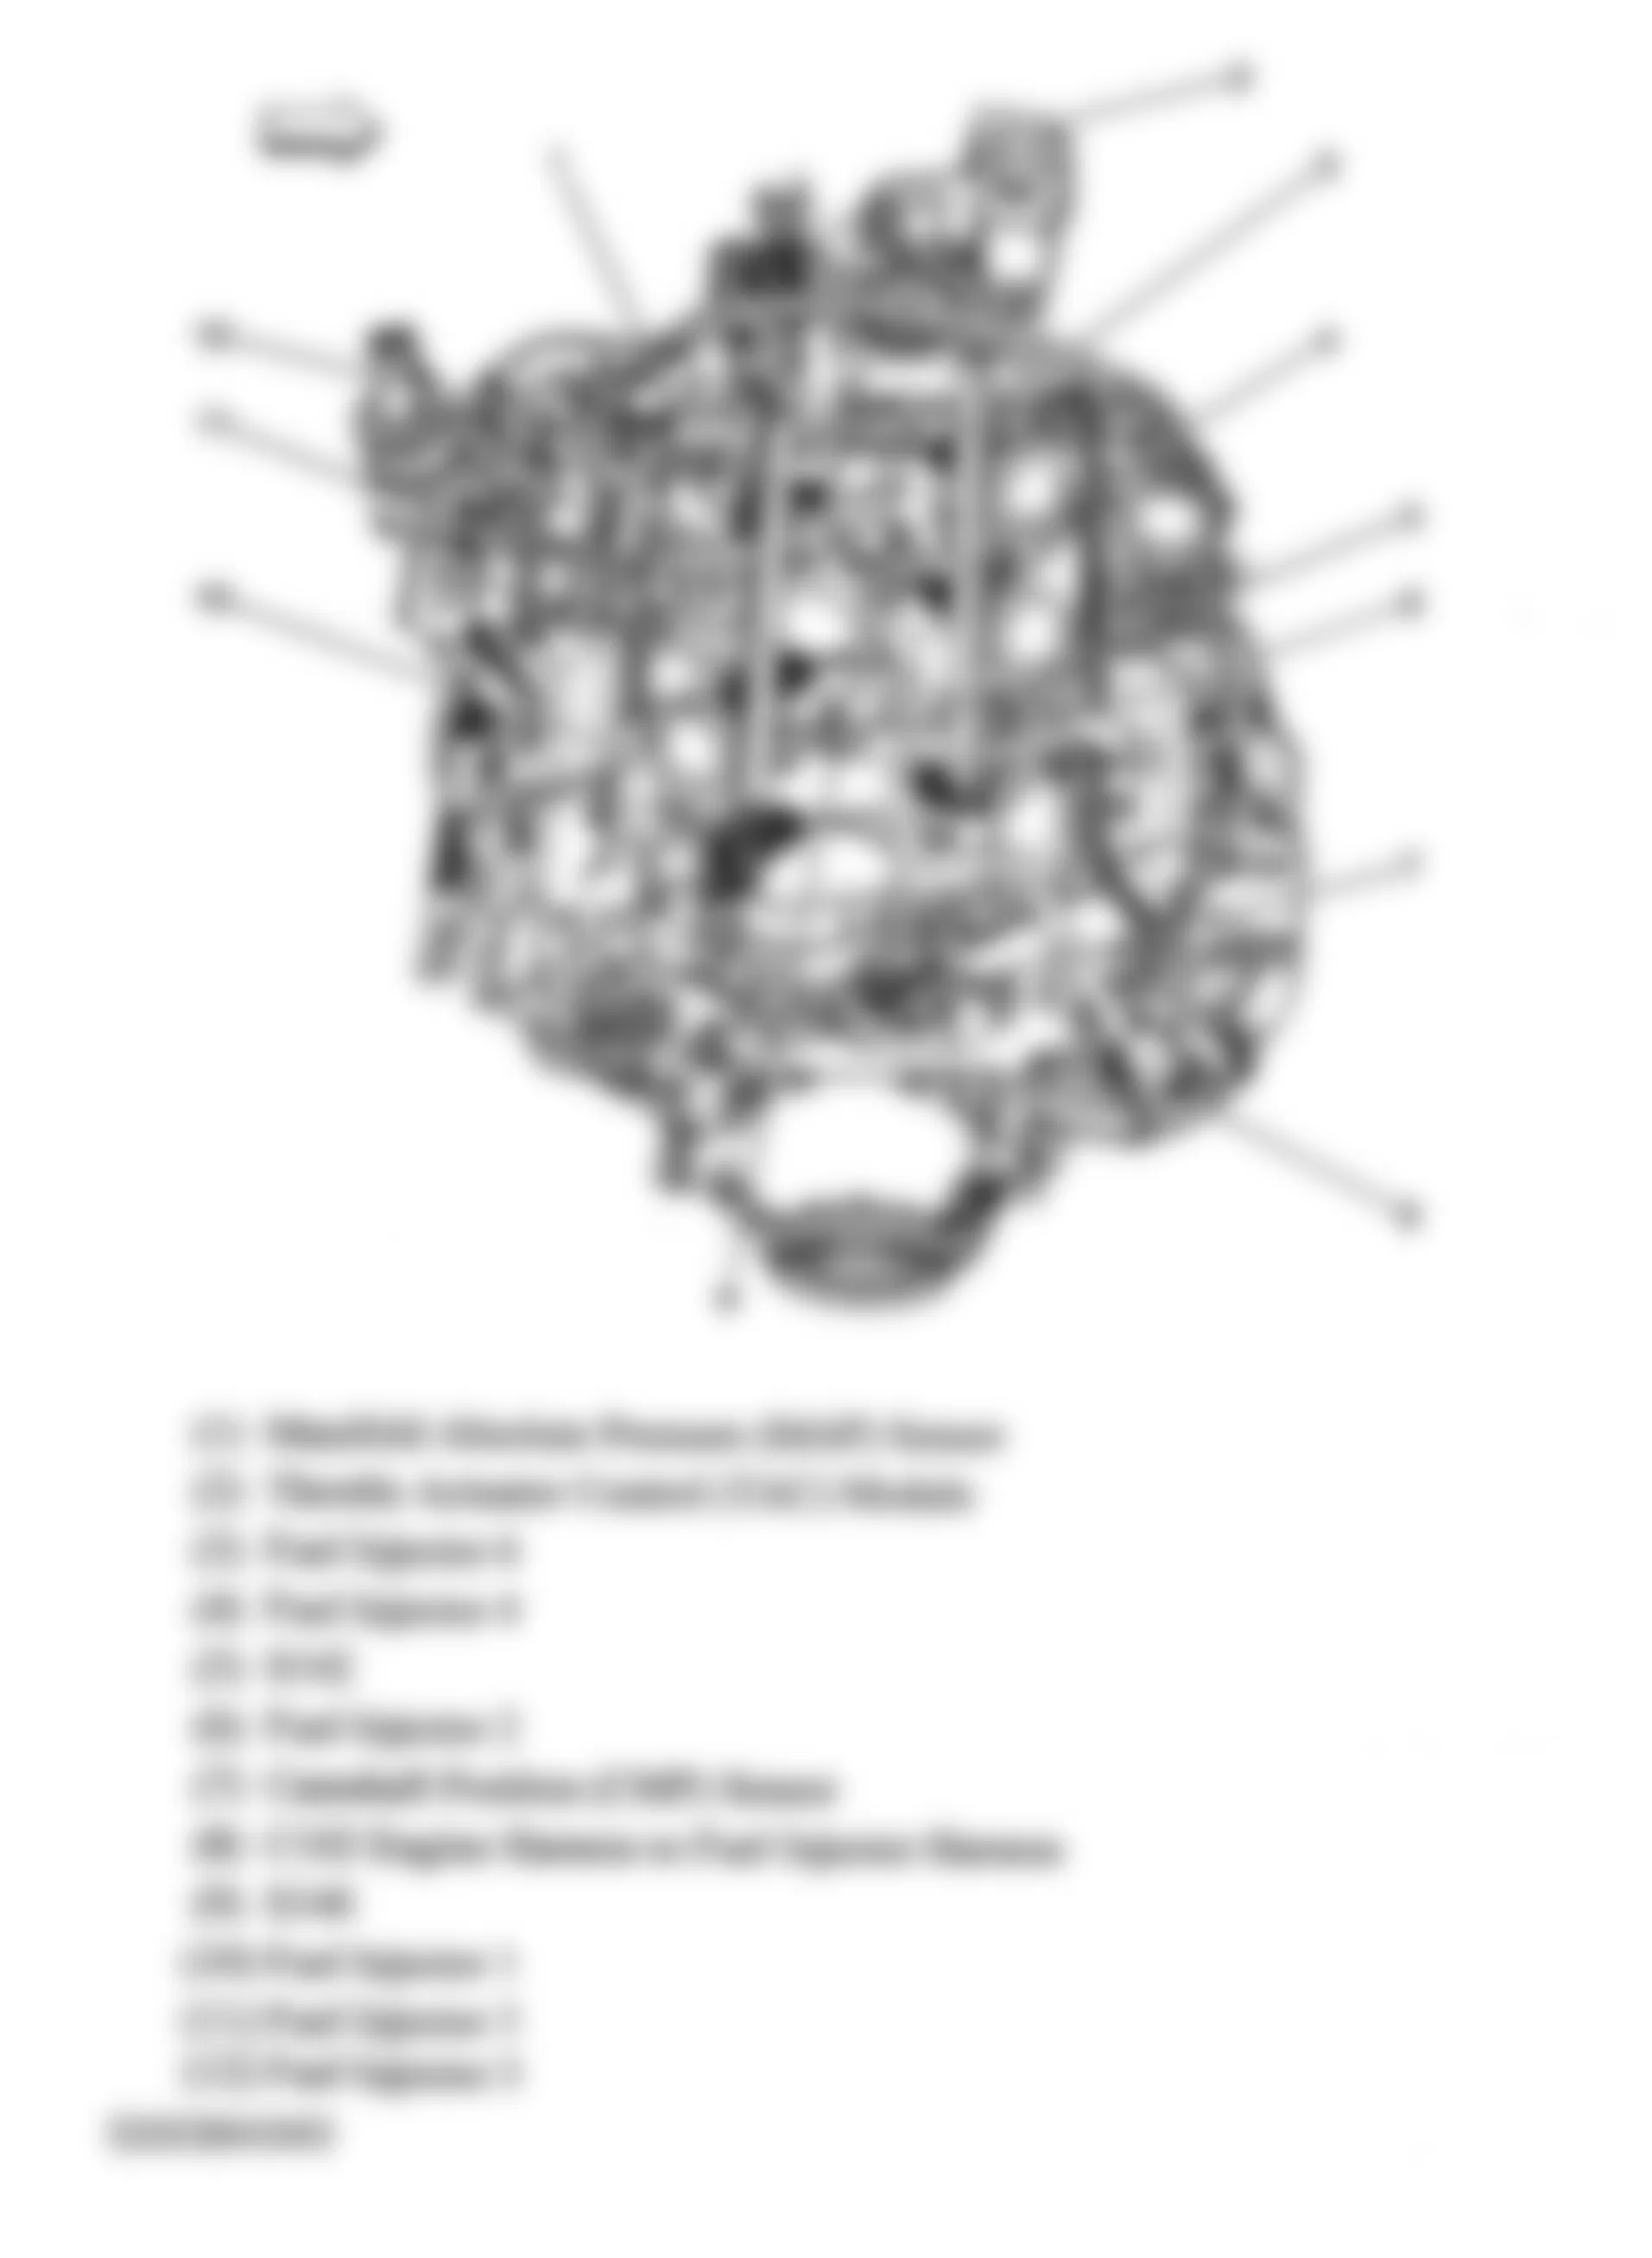 Buick Terraza CXL 2006 - Component Locations -  Engine Assembly